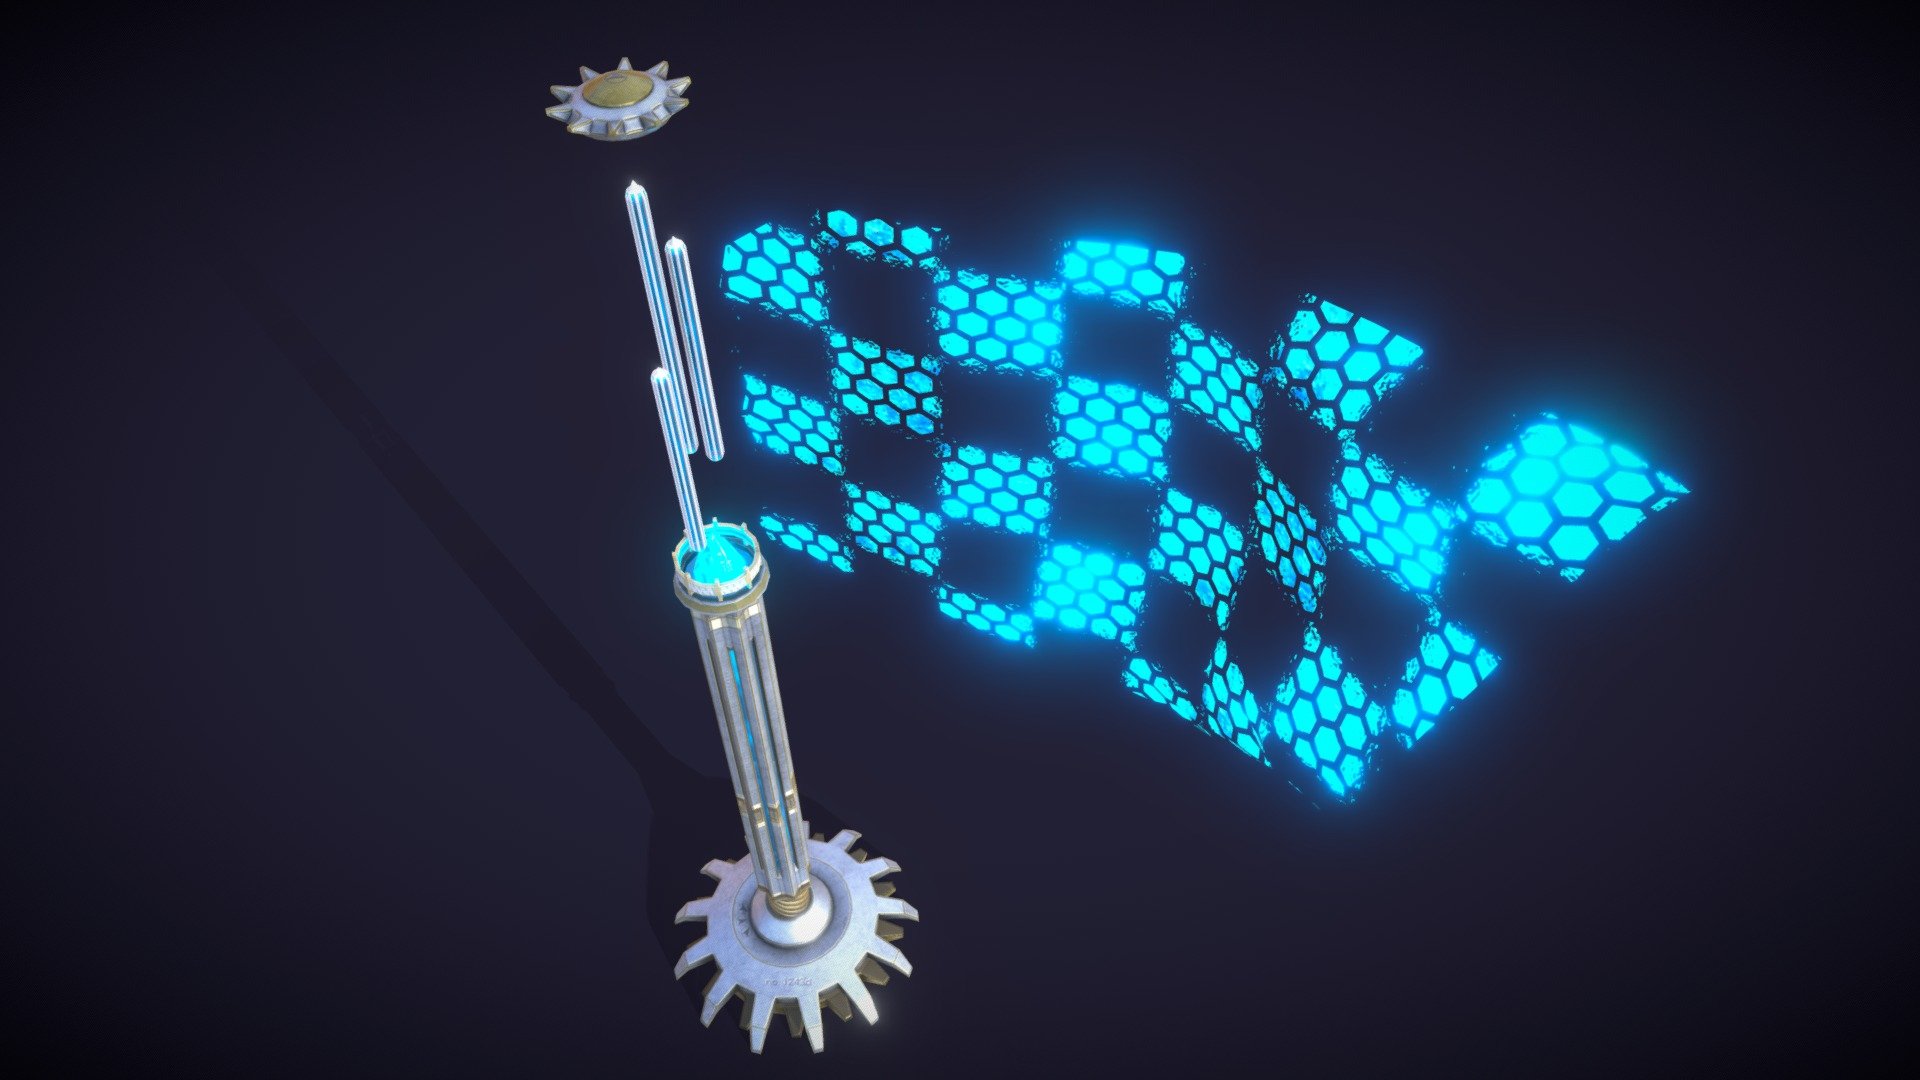 Futuristic pylon with projecting flag hologram.

Flag is different material and can easily be replaced by any image.

Contains original blender scene, baked alembic file and baked FBX (animated shapeKeys for flag) 3d model